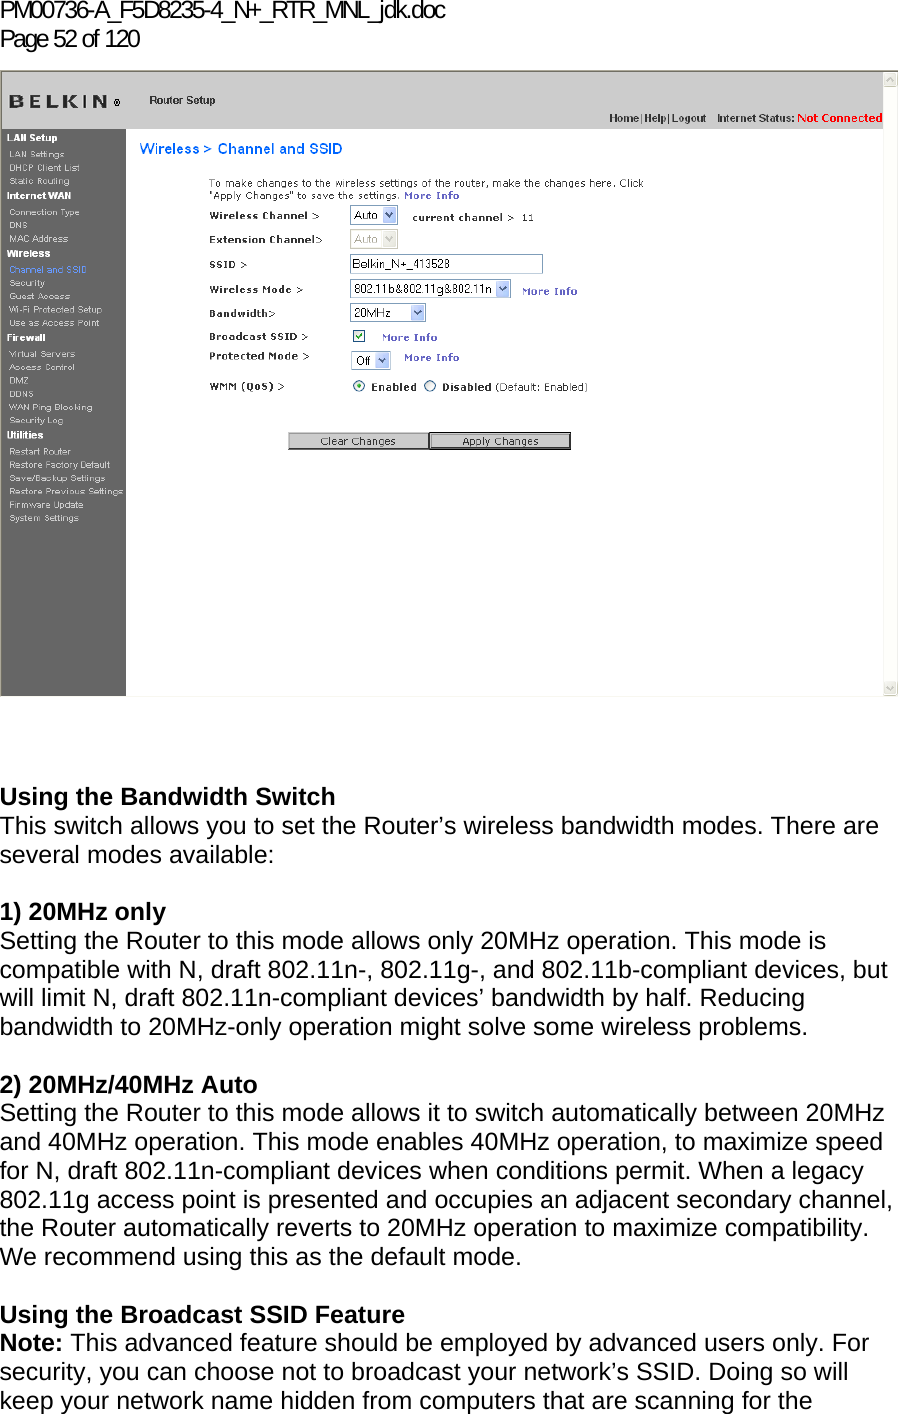 PM00736-A_F5D8235-4_N+_RTR_MNL_jdk.doc Page 52 of 120     Using the Bandwidth Switch This switch allows you to set the Router’s wireless bandwidth modes. There are several modes available:  1) 20MHz only Setting the Router to this mode allows only 20MHz operation. This mode is compatible with N, draft 802.11n-, 802.11g-, and 802.11b-compliant devices, but will limit N, draft 802.11n-compliant devices’ bandwidth by half. Reducing bandwidth to 20MHz-only operation might solve some wireless problems.  2) 20MHz/40MHz Auto Setting the Router to this mode allows it to switch automatically between 20MHz and 40MHz operation. This mode enables 40MHz operation, to maximize speed for N, draft 802.11n-compliant devices when conditions permit. When a legacy 802.11g access point is presented and occupies an adjacent secondary channel, the Router automatically reverts to 20MHz operation to maximize compatibility. We recommend using this as the default mode.  Using the Broadcast SSID Feature Note: This advanced feature should be employed by advanced users only. For security, you can choose not to broadcast your network’s SSID. Doing so will keep your network name hidden from computers that are scanning for the 